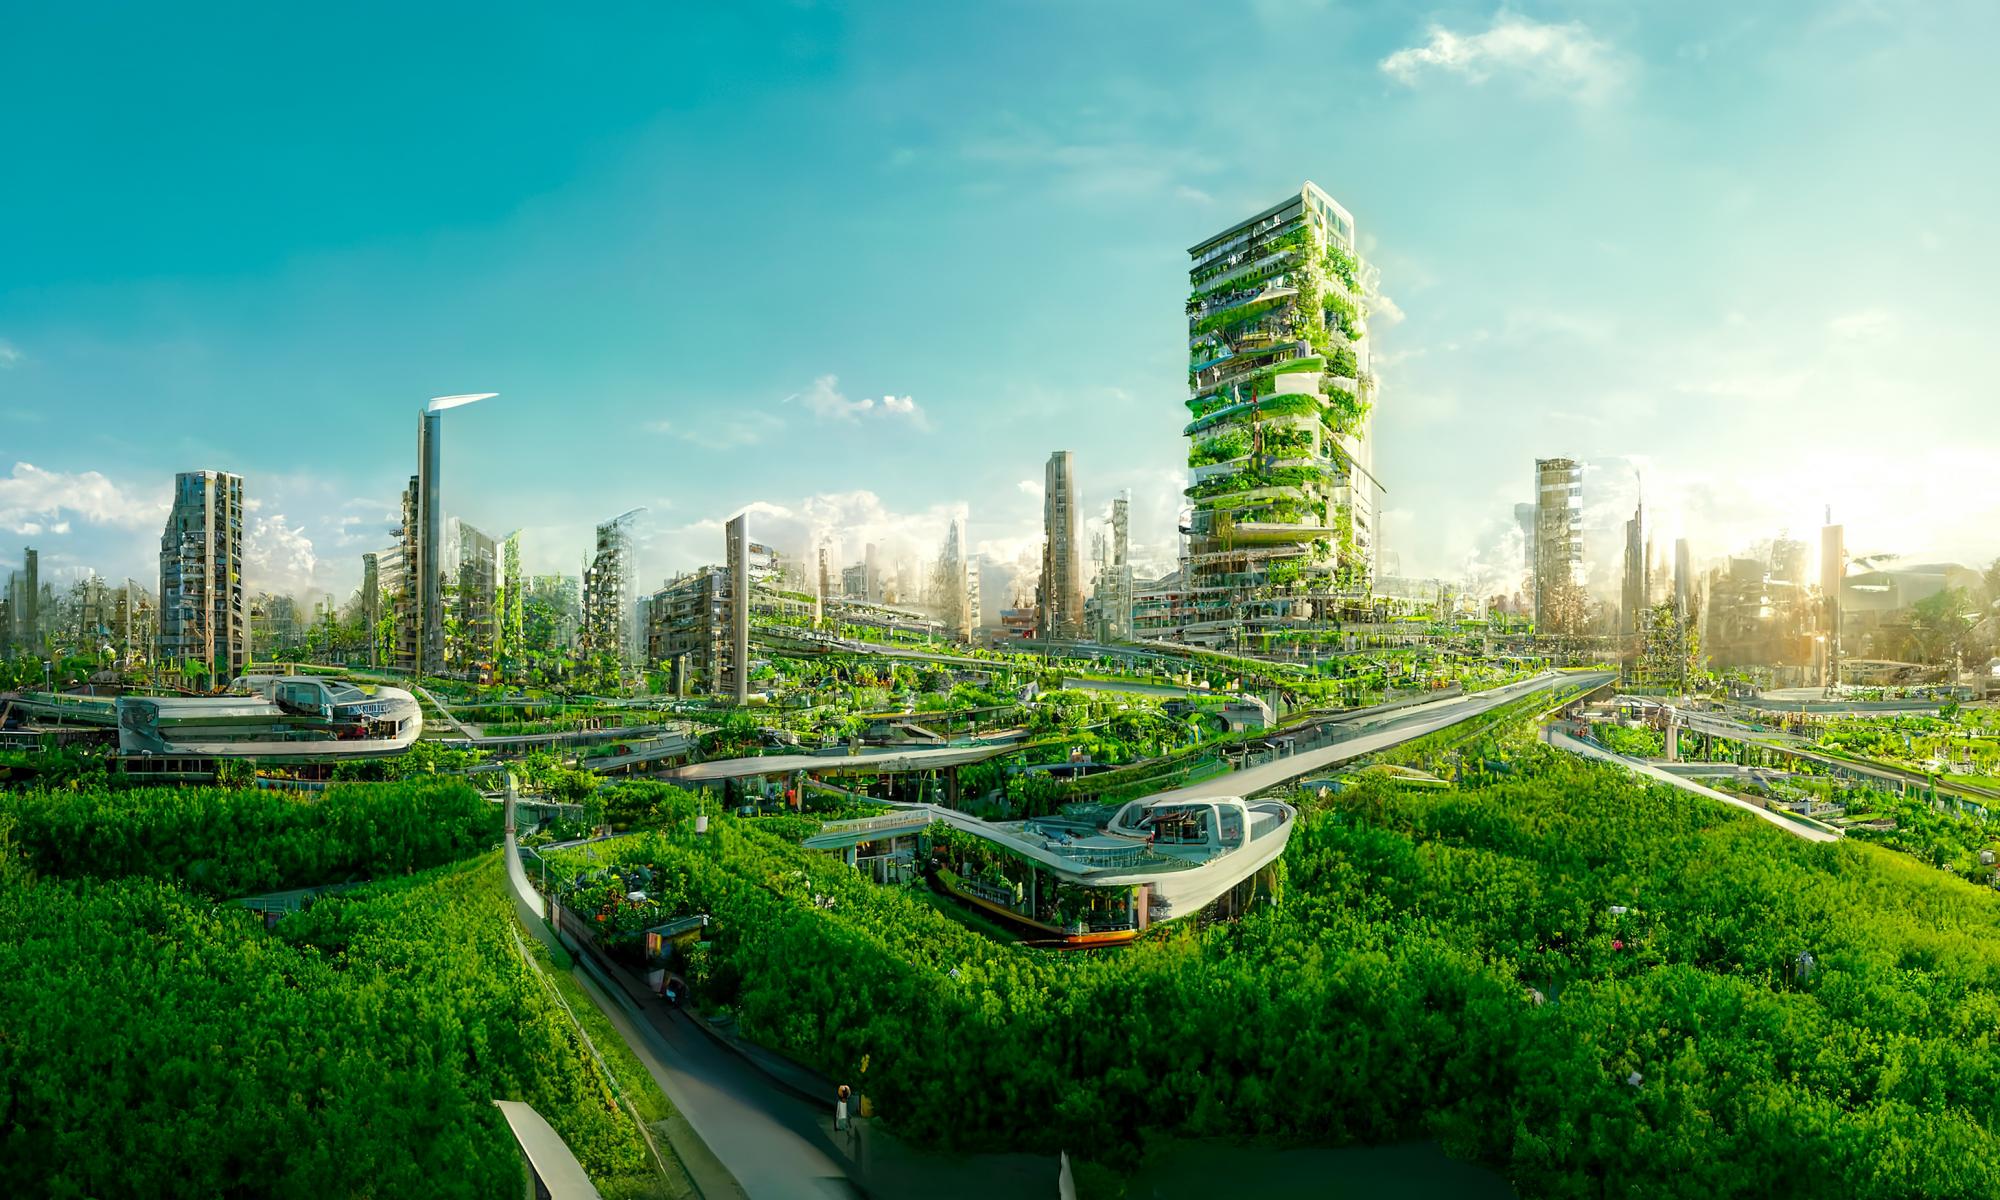 A futuristic city with skyscrapers and lush greenery on and around every building.